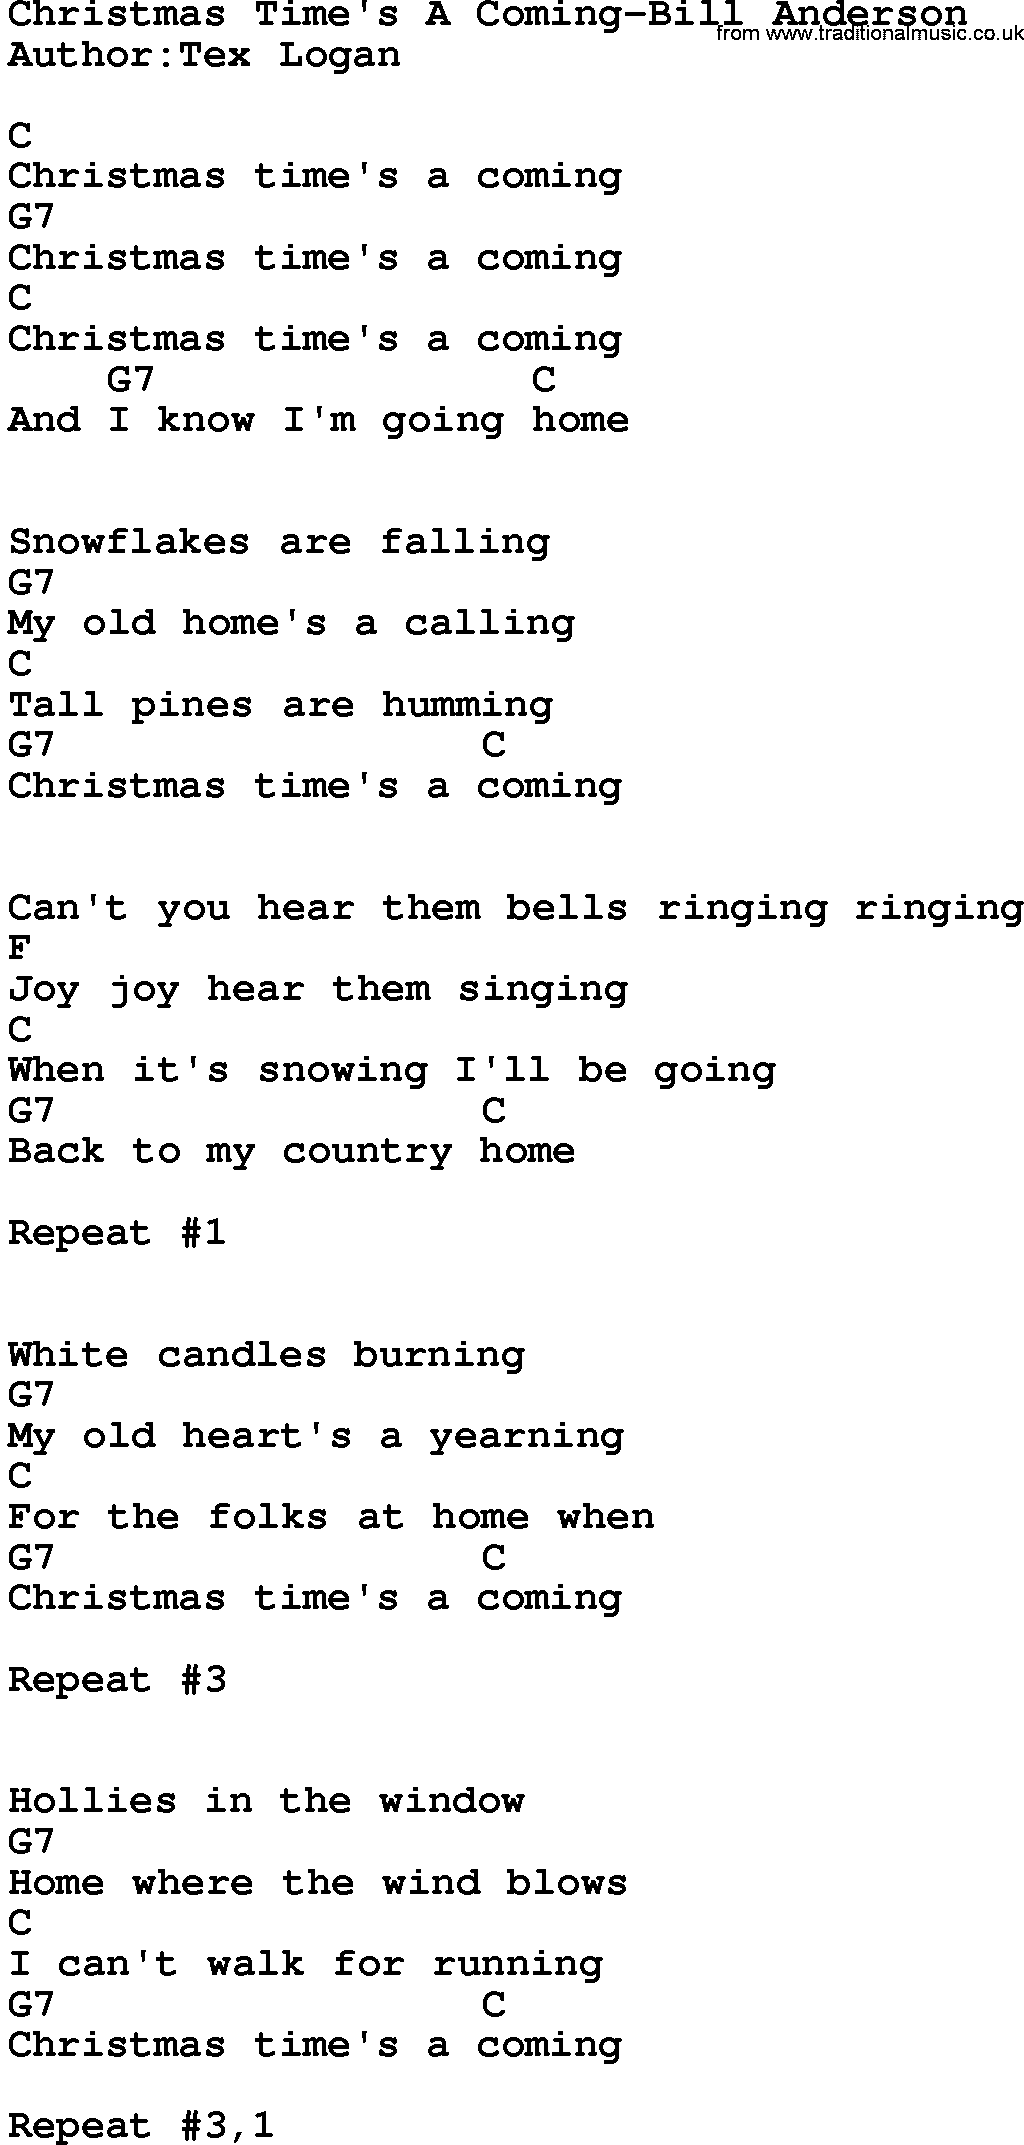 Country music song: Christmas Time's A Coming-Bill Anderson lyrics and chords